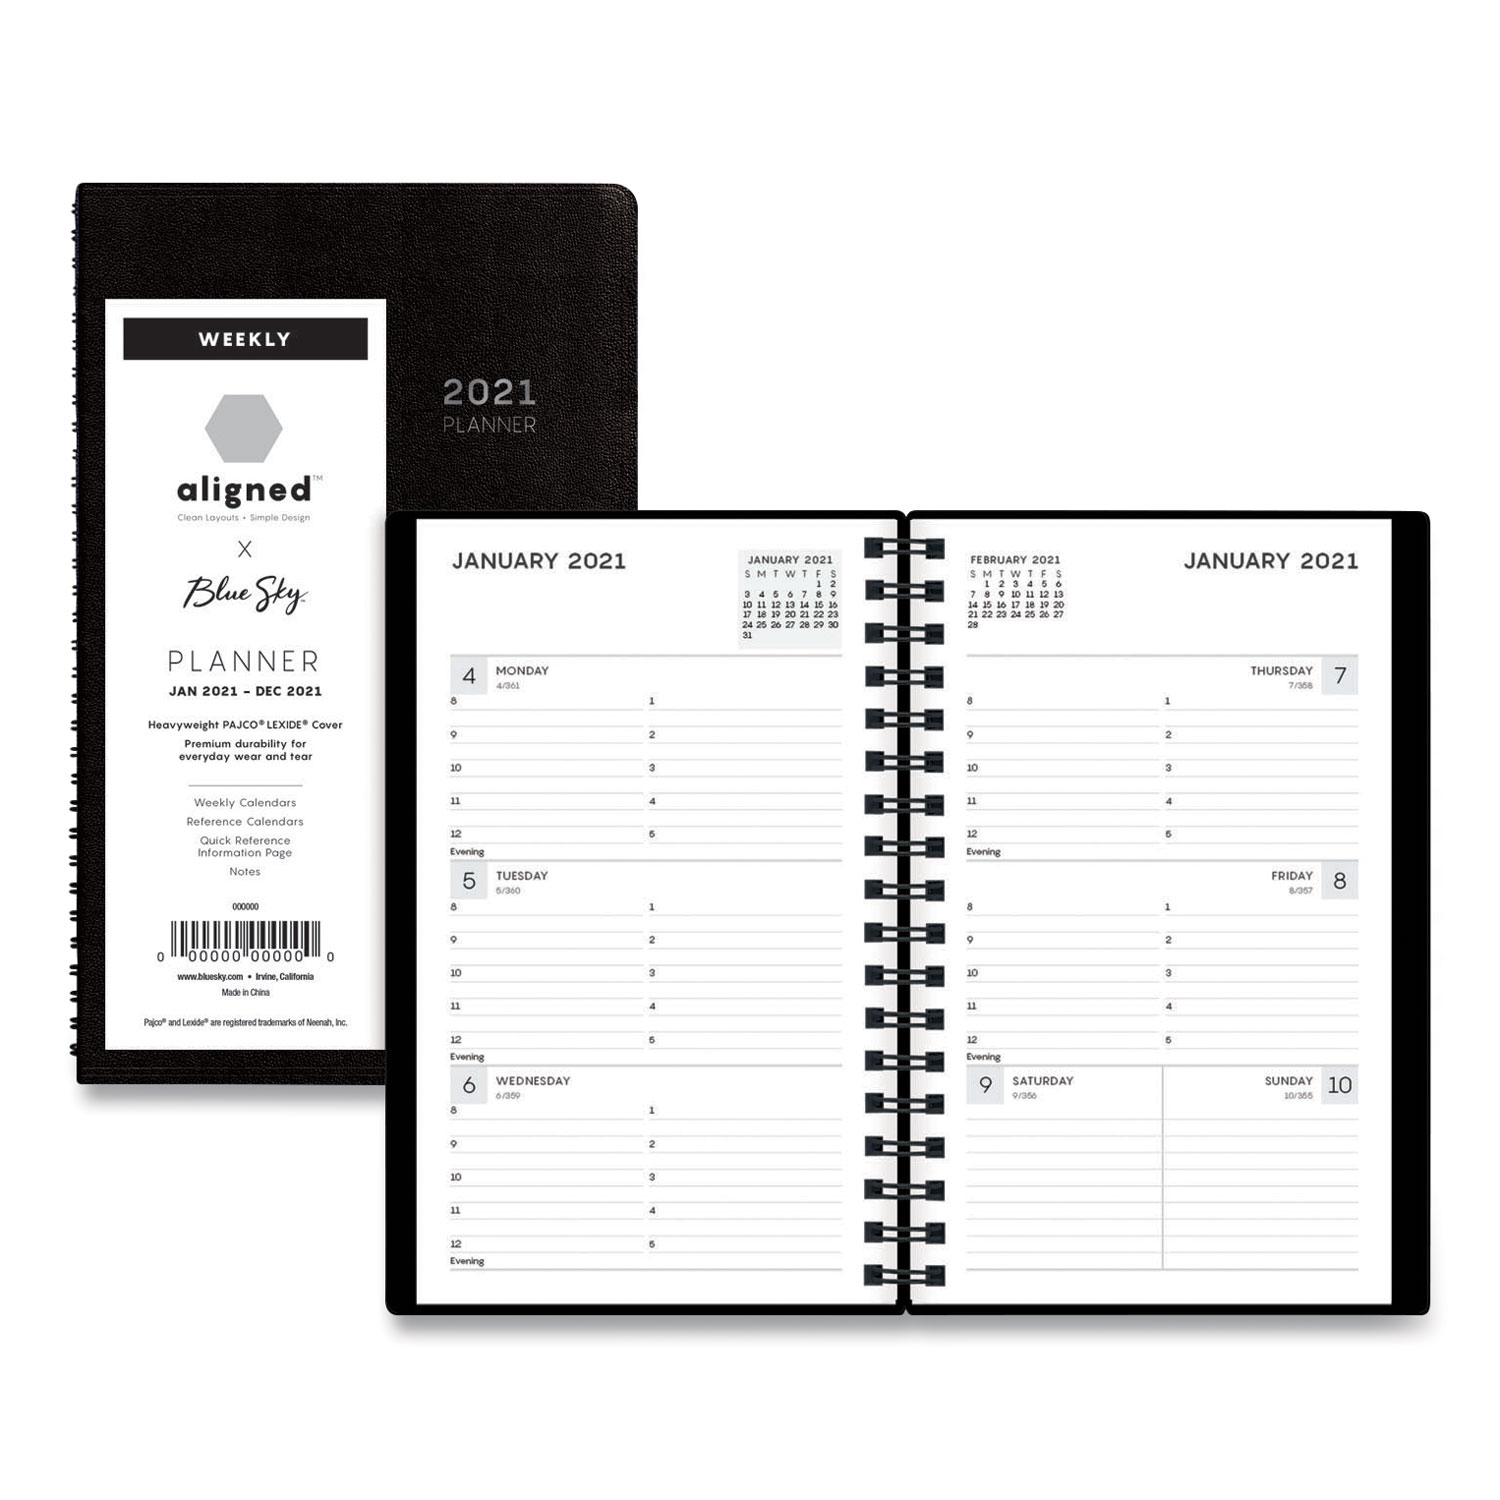  Blue Sky 123854 Aligned Weekly Contacts Planner, 6 x 3.5, Black, 2021 (BLS123854) 